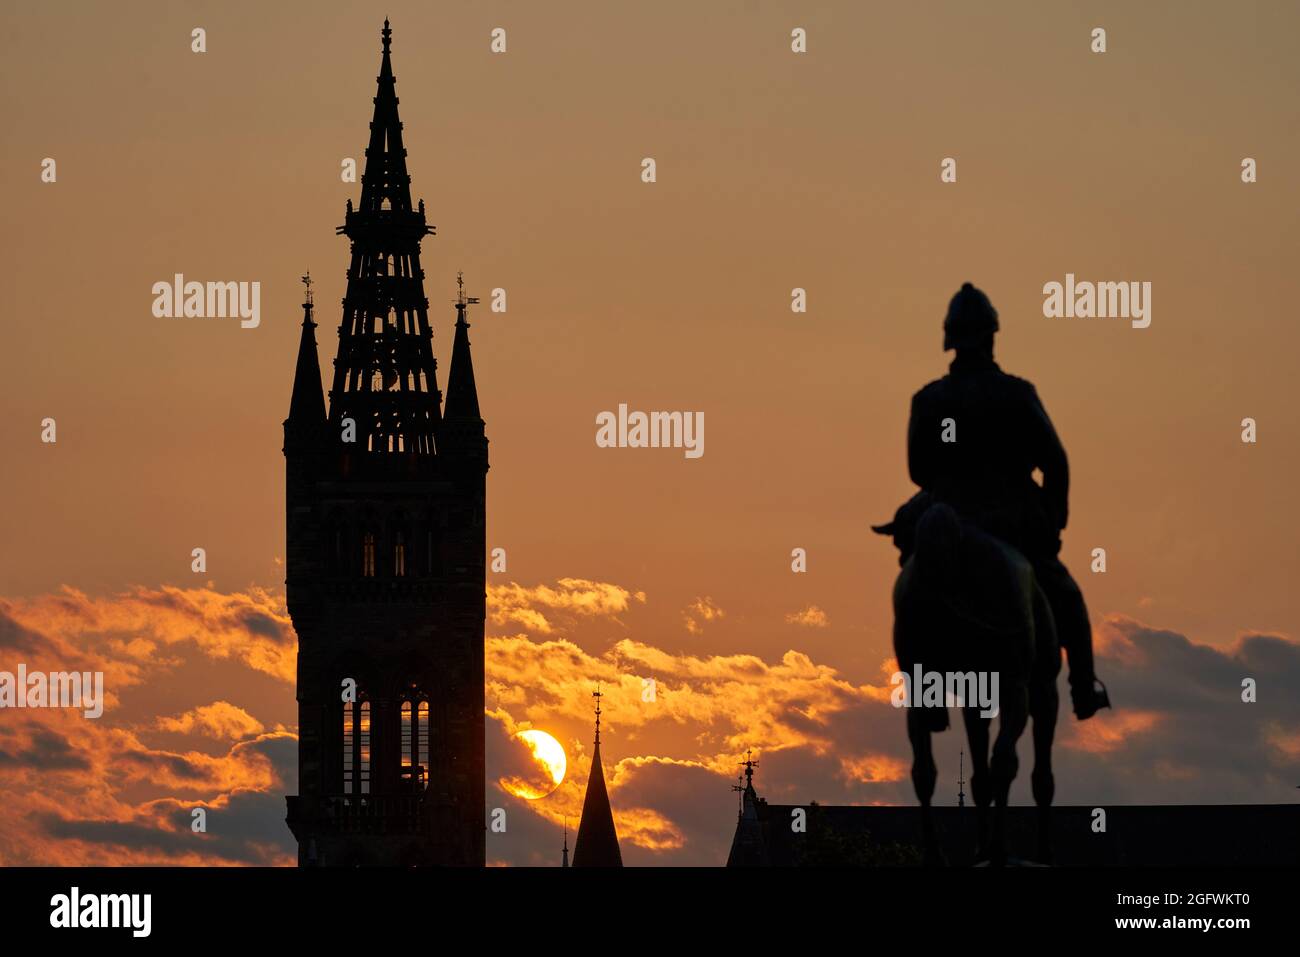 Telephoto lens shot of stunning sunset behind the University of Glasgow tower with the statue of Lord Roberts of Kandahar foreground. Stock Photo